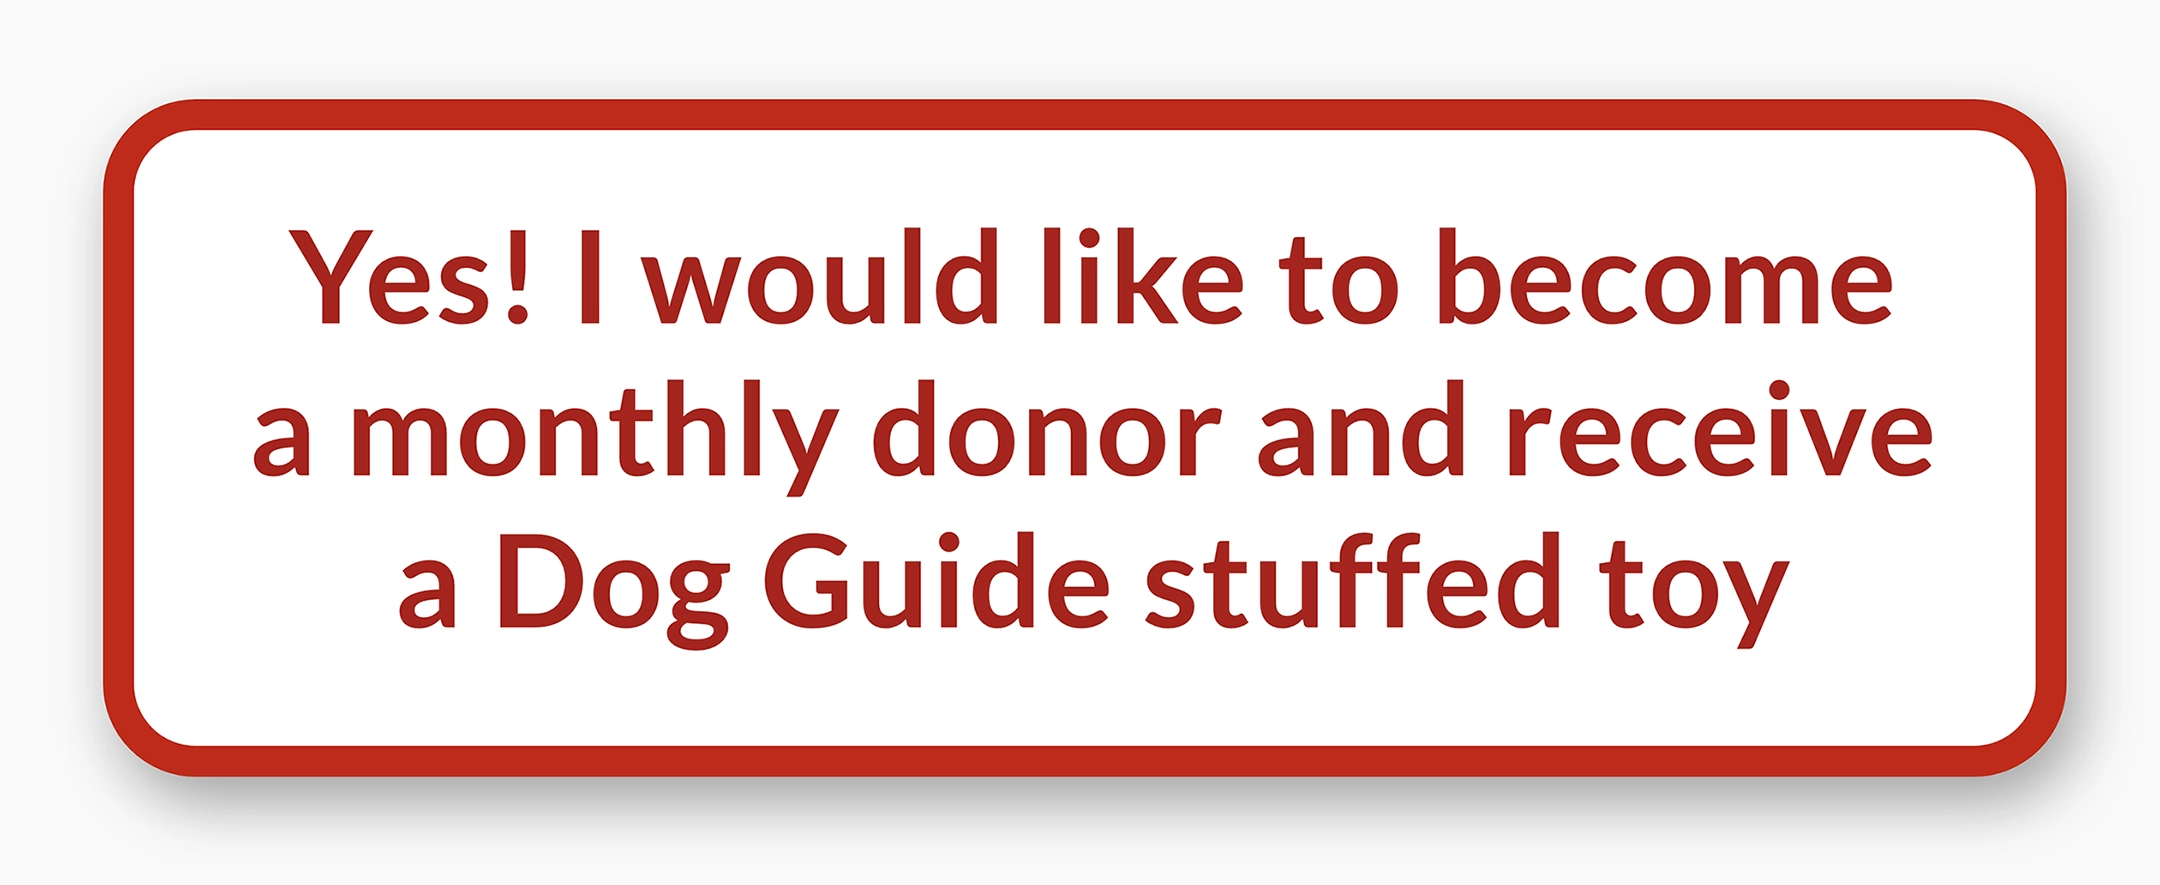 Yes! I would like to become a monthly donor and receive a Dog Guide stuffed toy